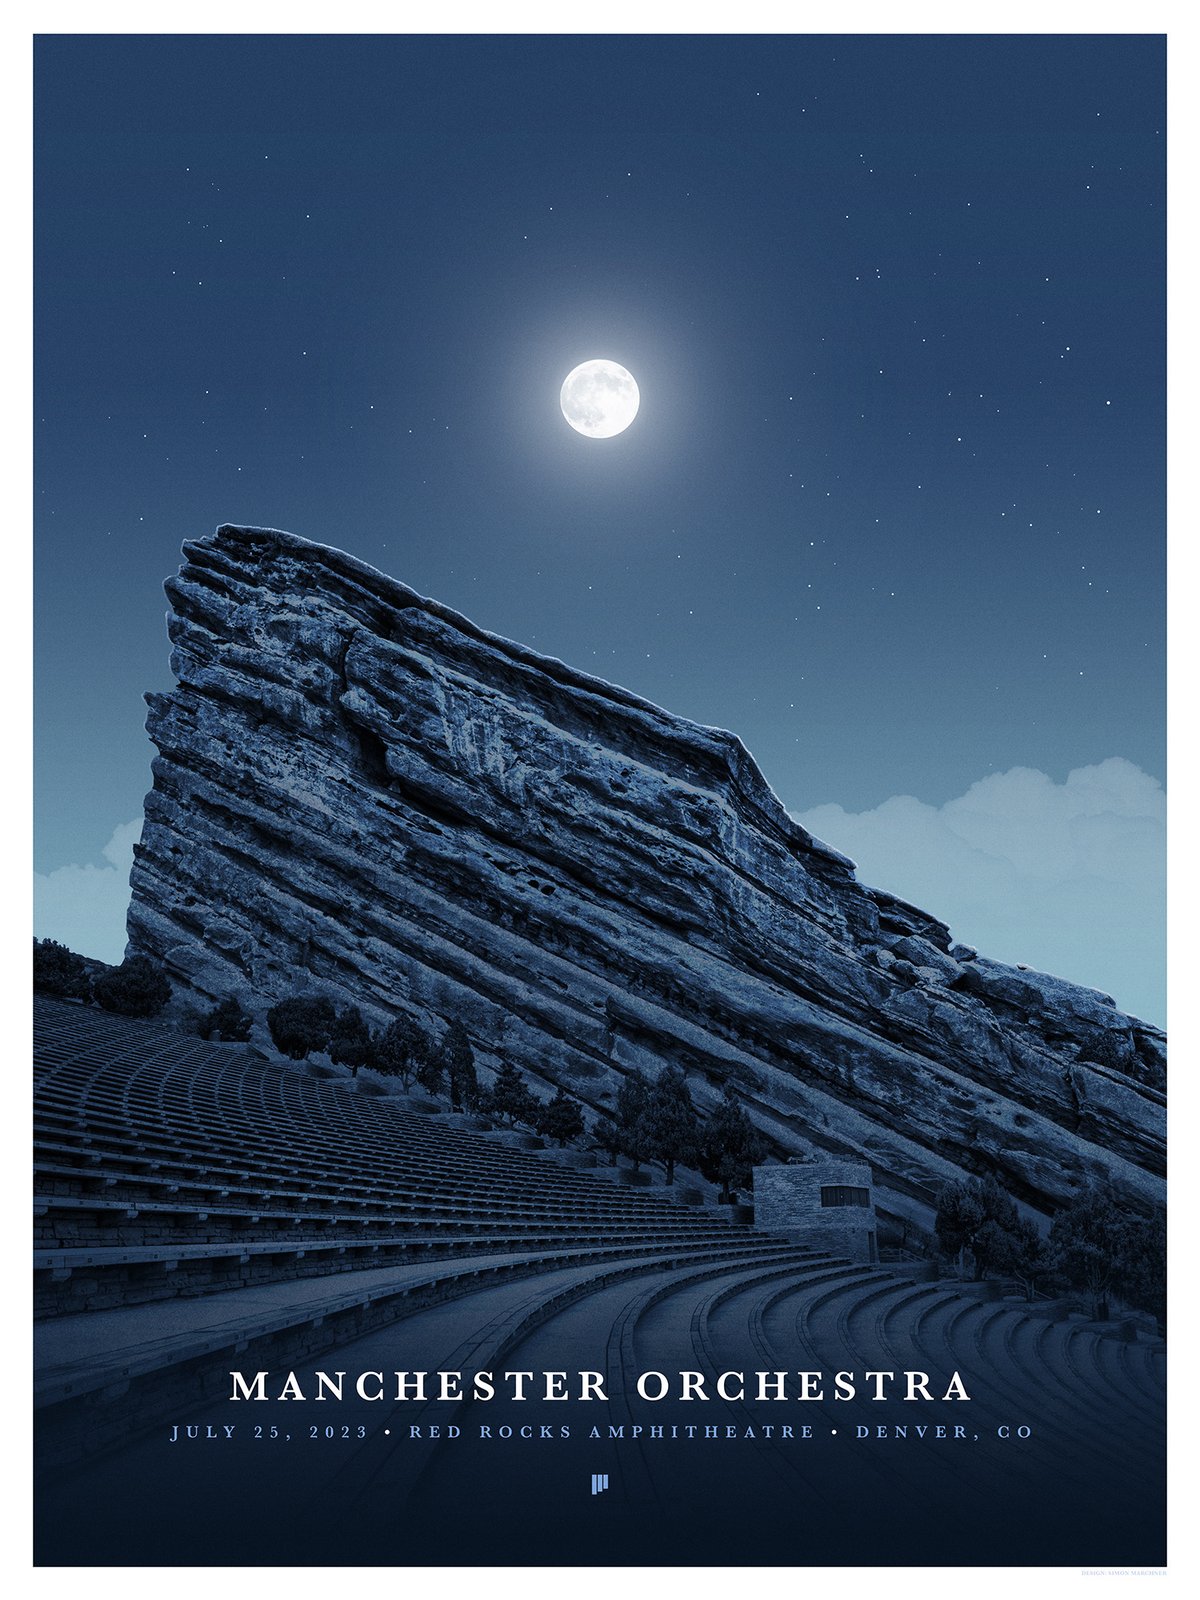 Simon Marchner — Manchester Orchestra Red Rocks 2023